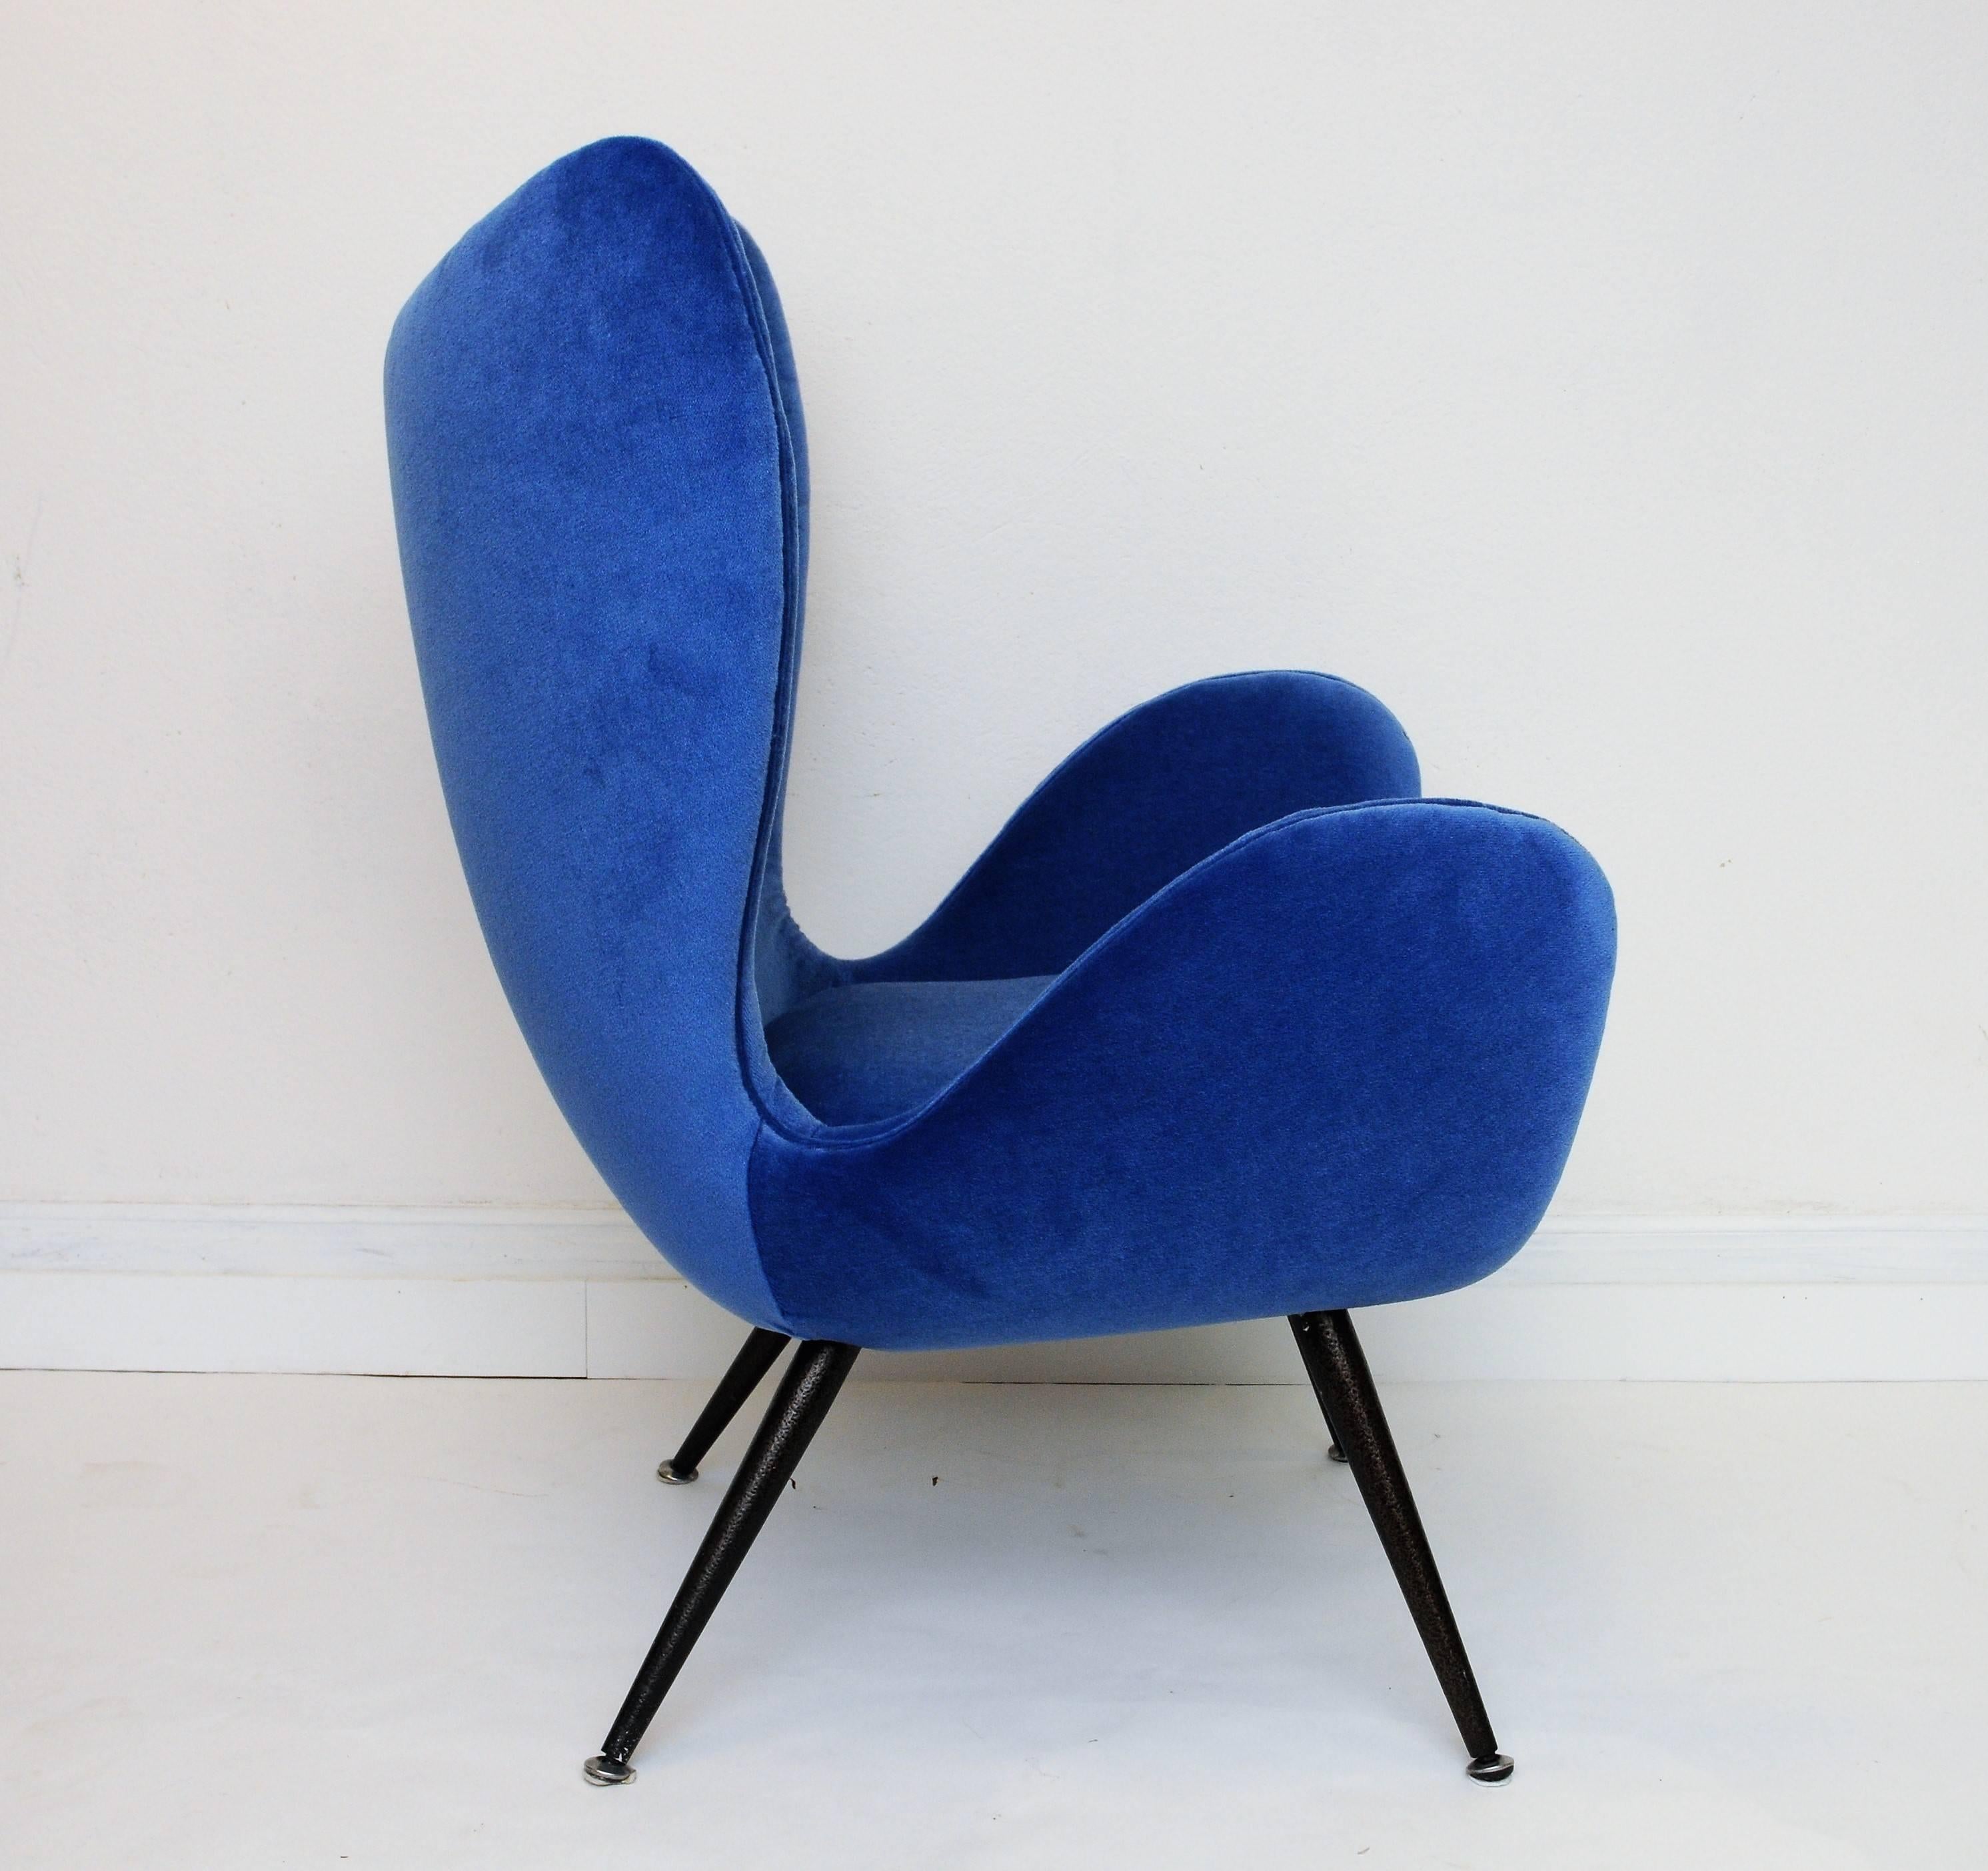 This pair of blue velvet armchairs has been newly upholstered and features metal drumstick legs in black color. With their quite so unusal form they might look like 